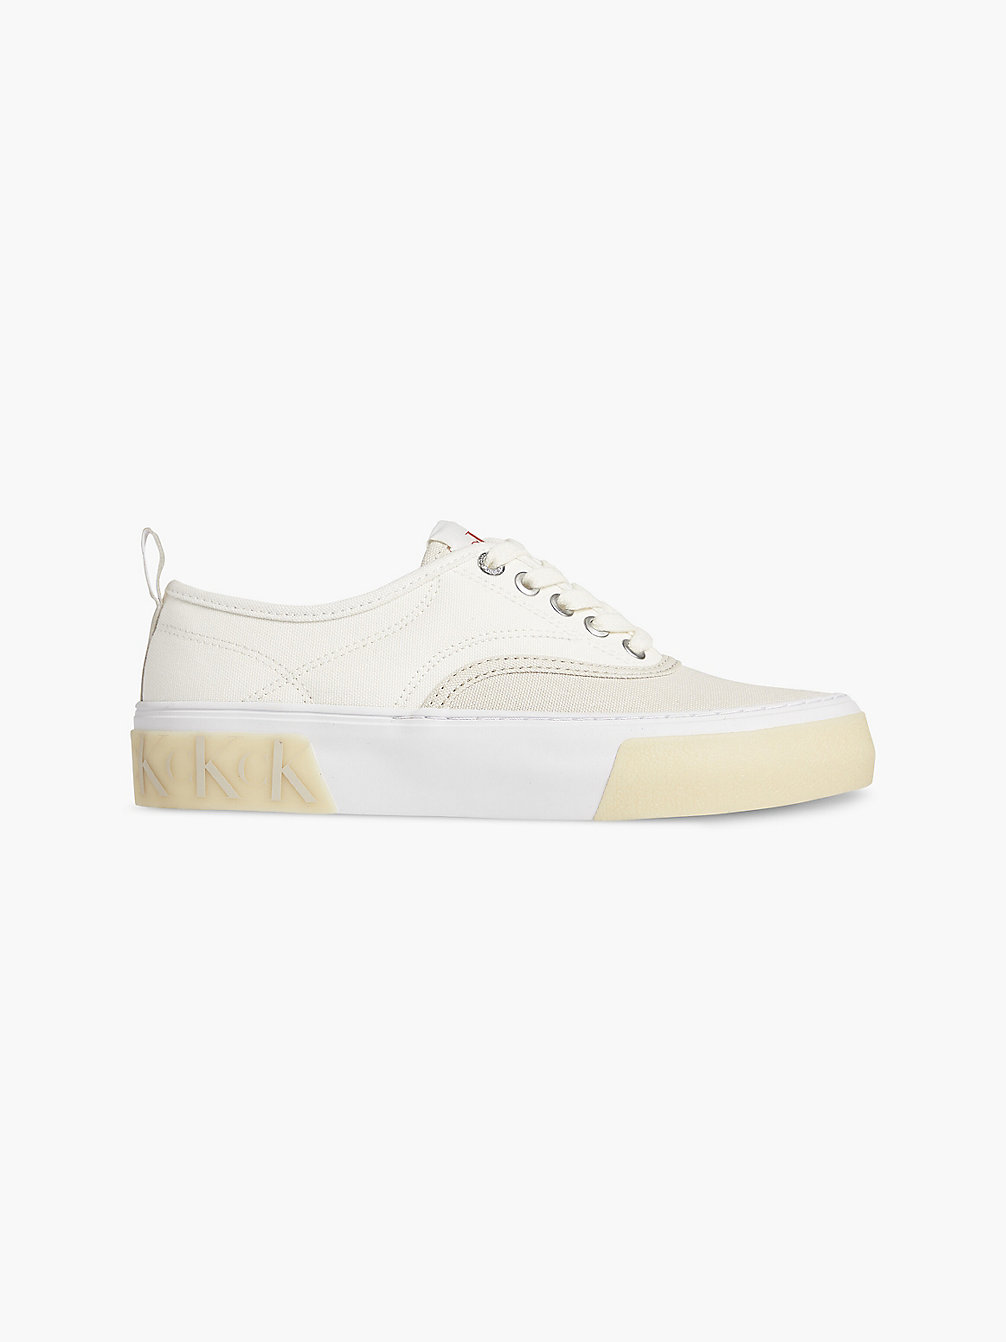 EGGSHELL Recycled Canvas Trainers undefined women Calvin Klein